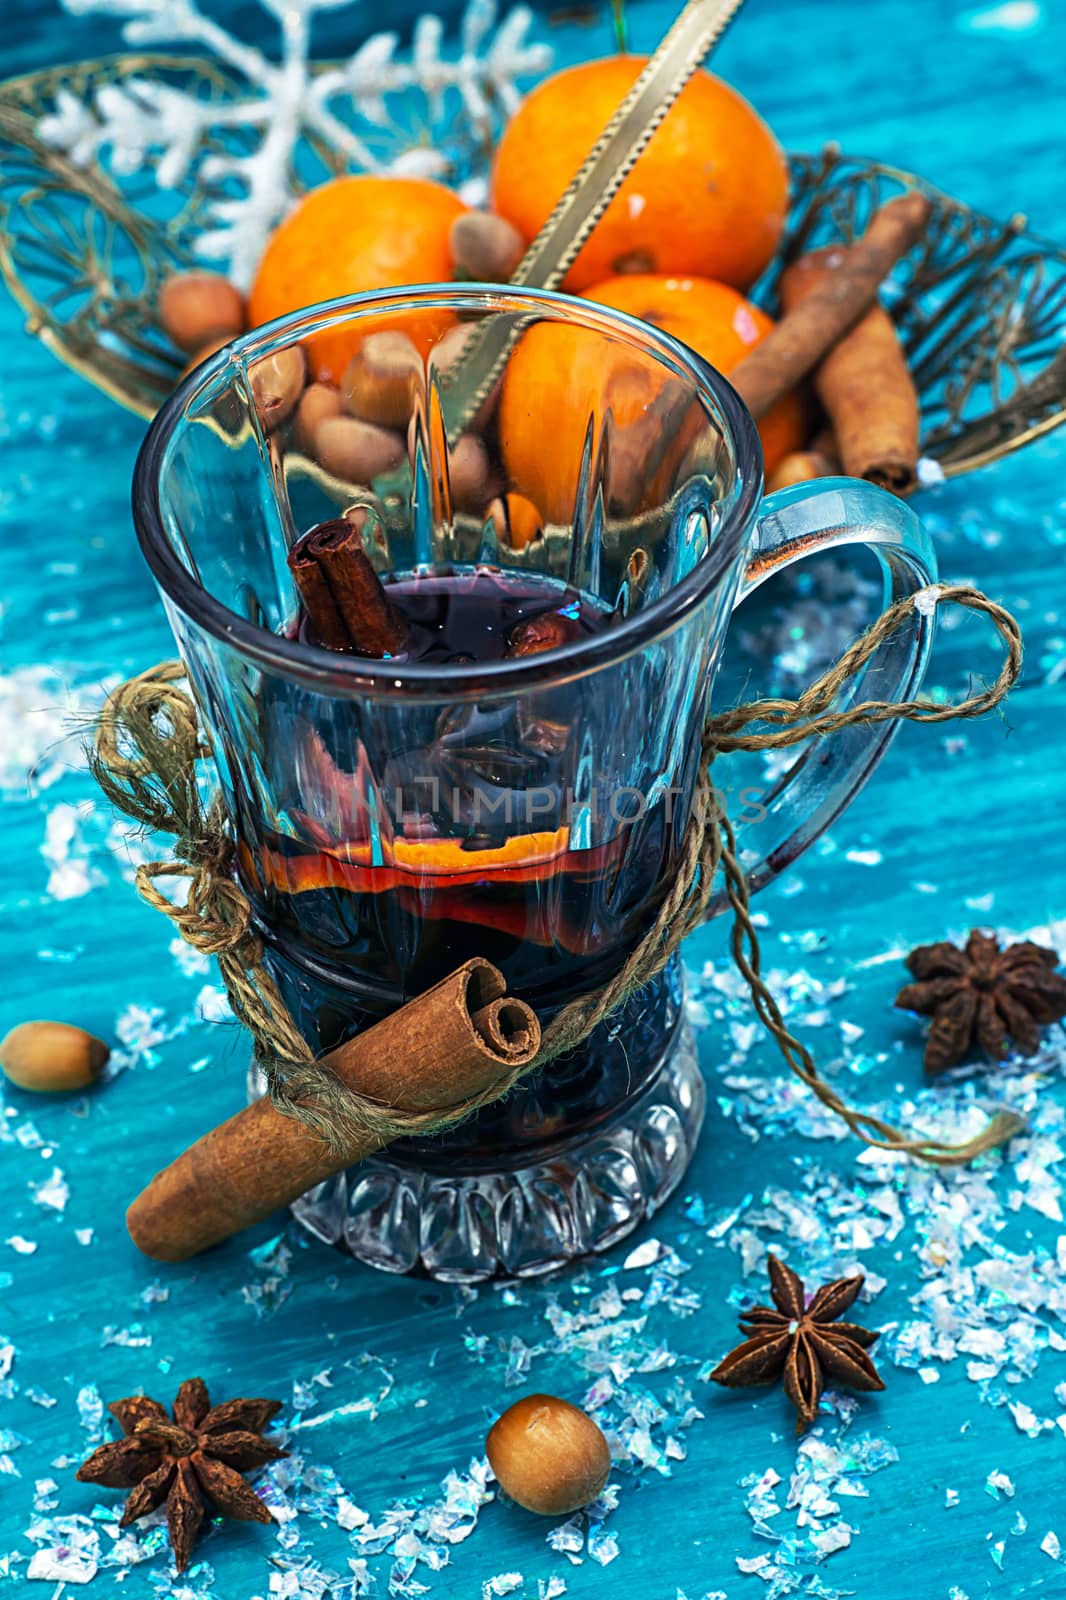 warming drink mulled wine on bright blue background.Photo tinted